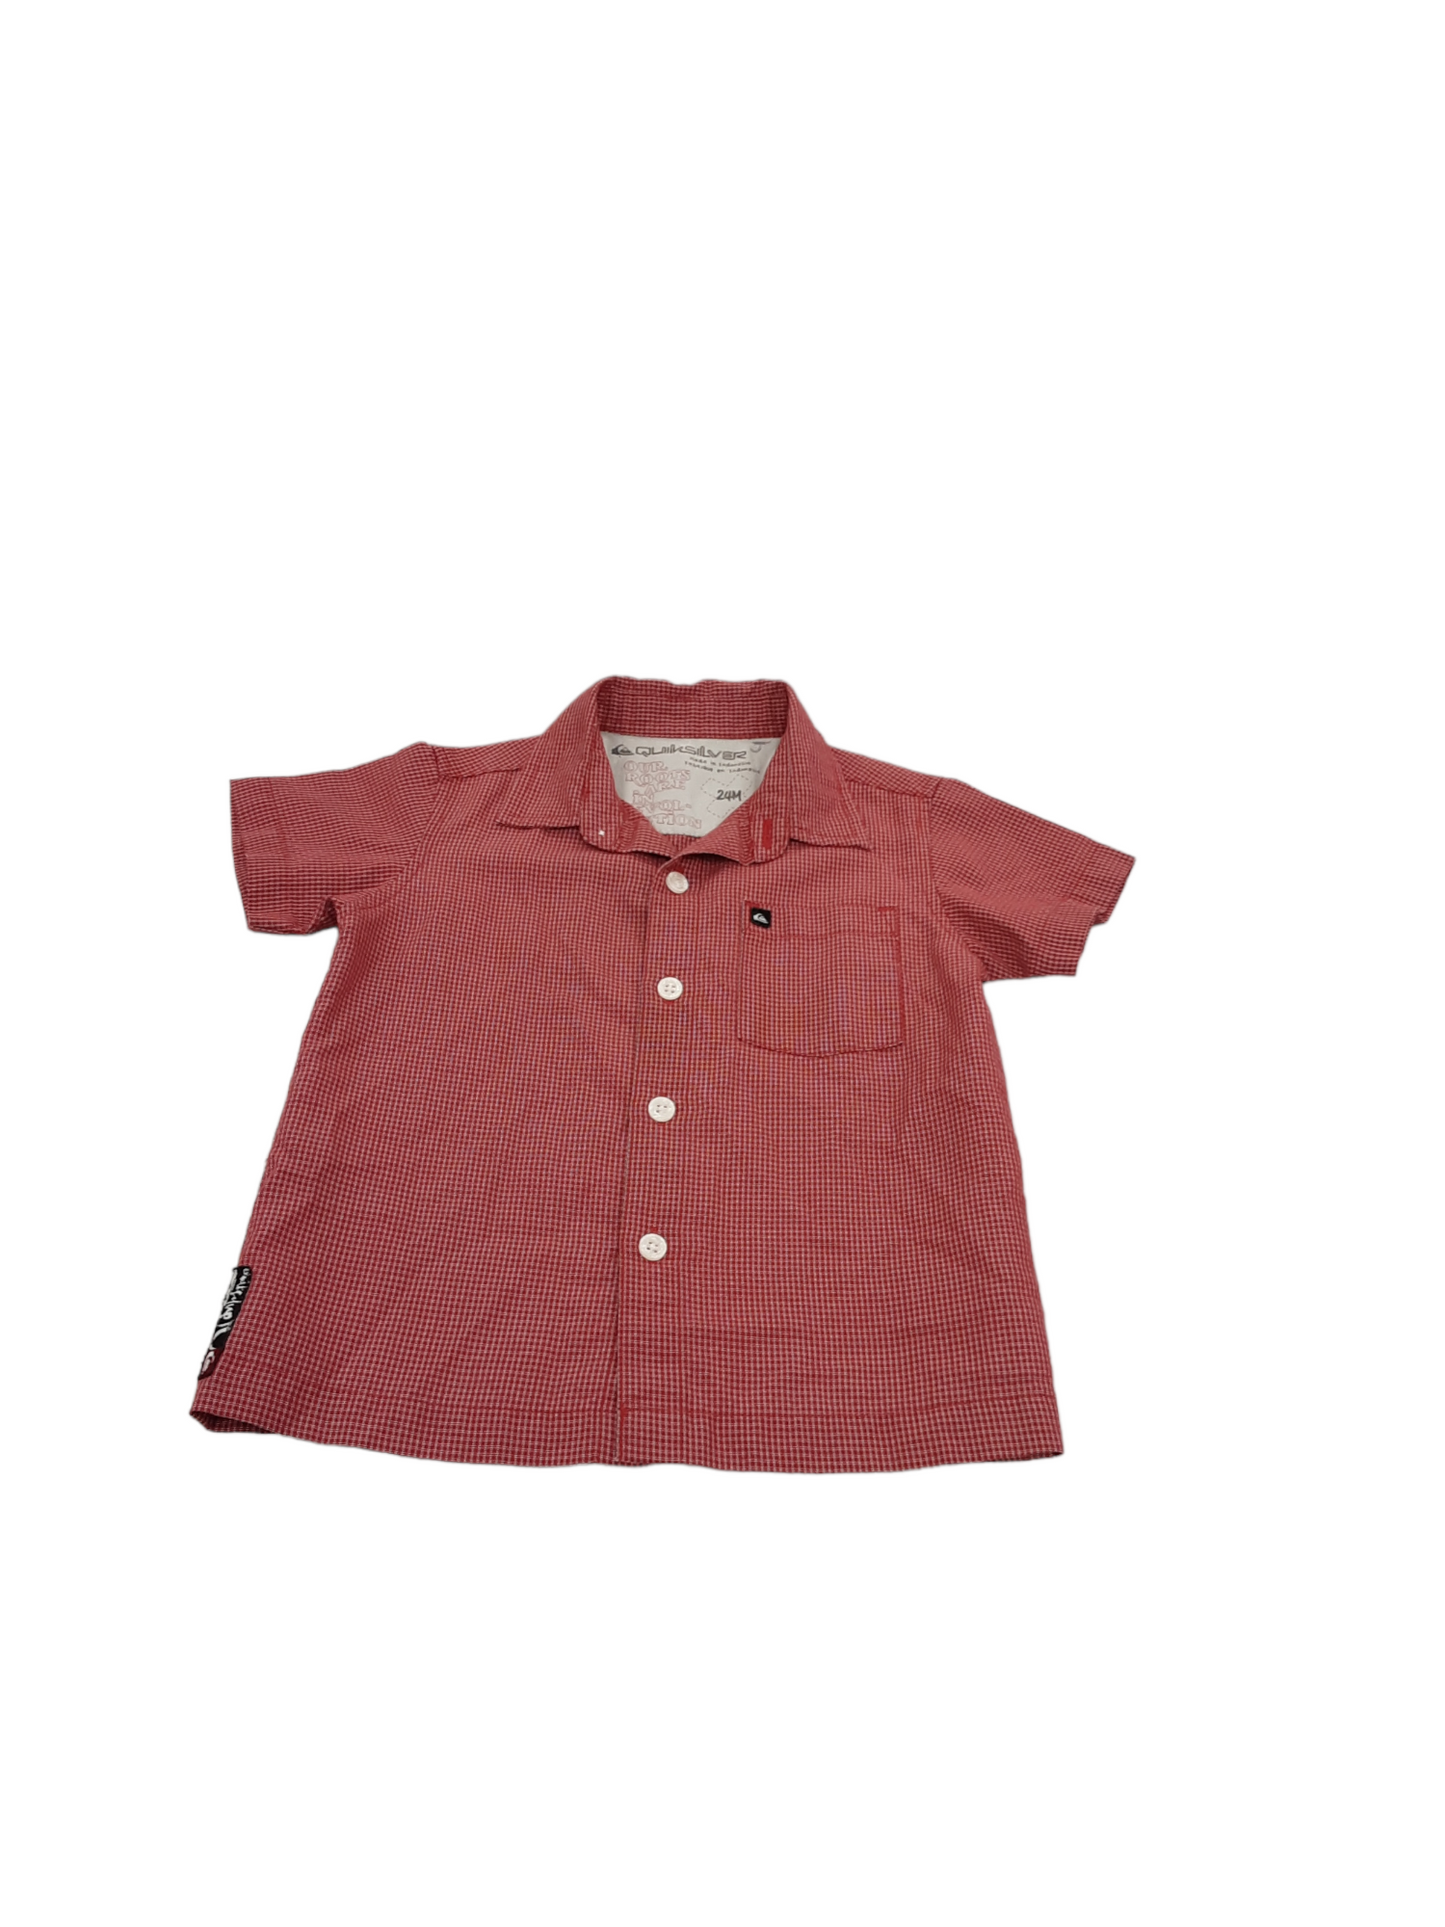 Small checker with pocket, Size 24m